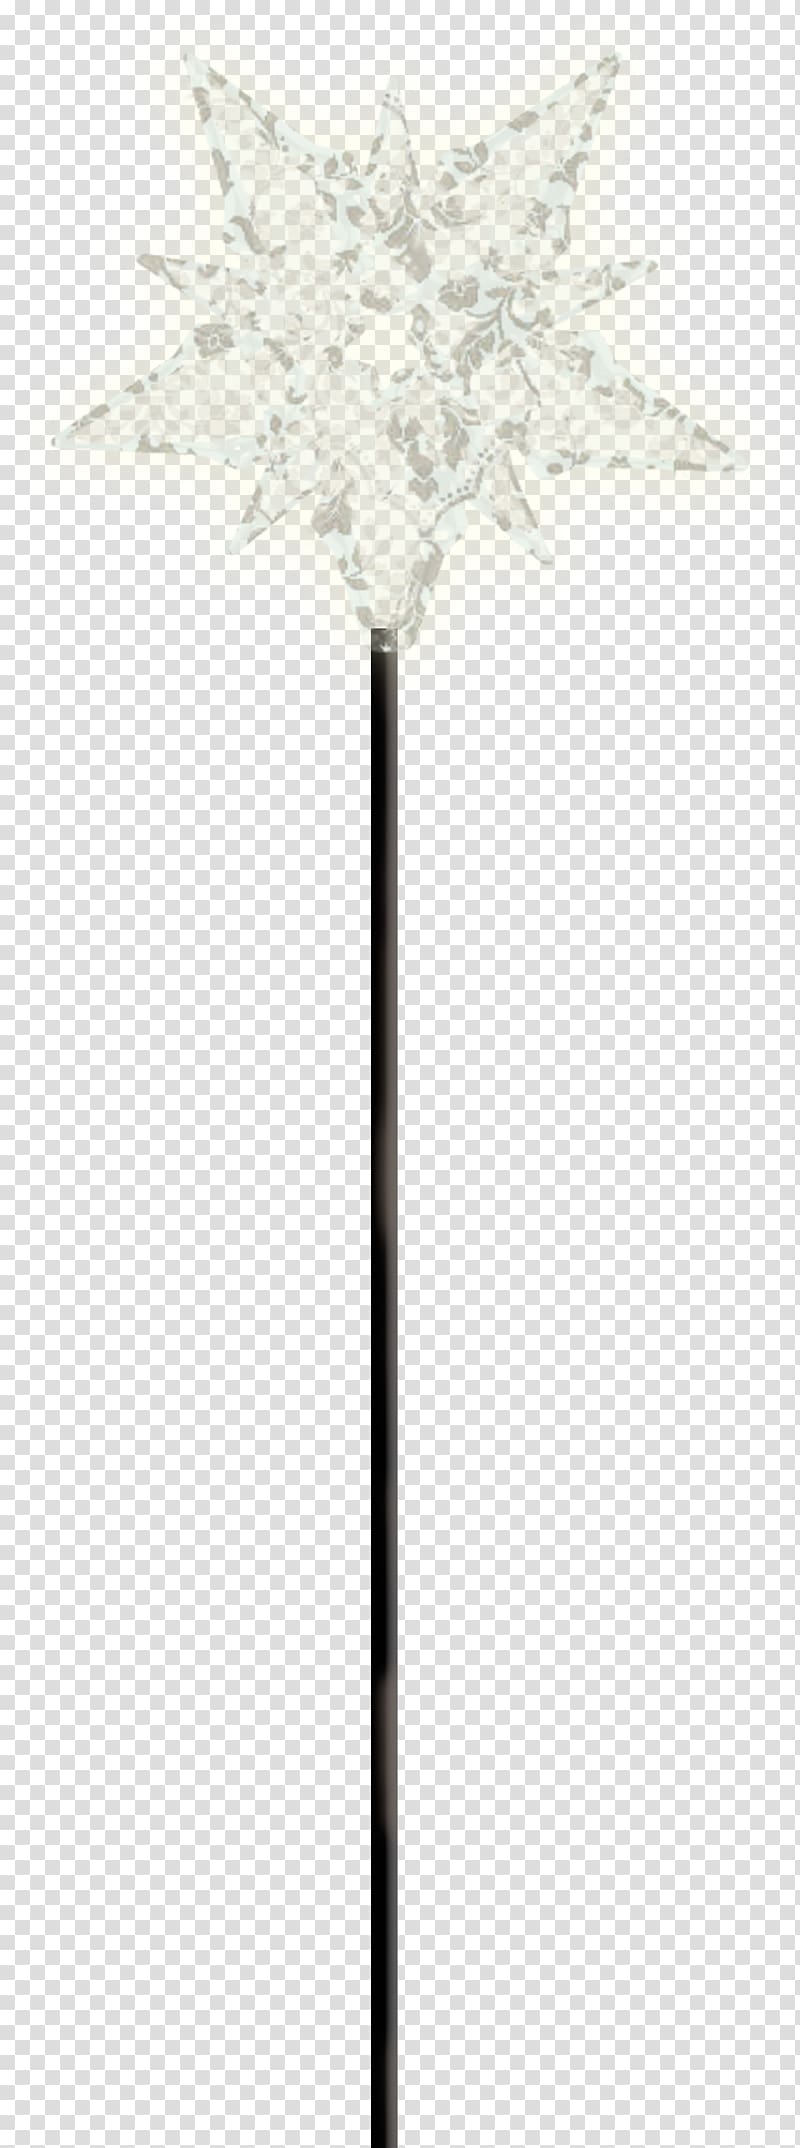 star magic wand transparent background PNG clipart